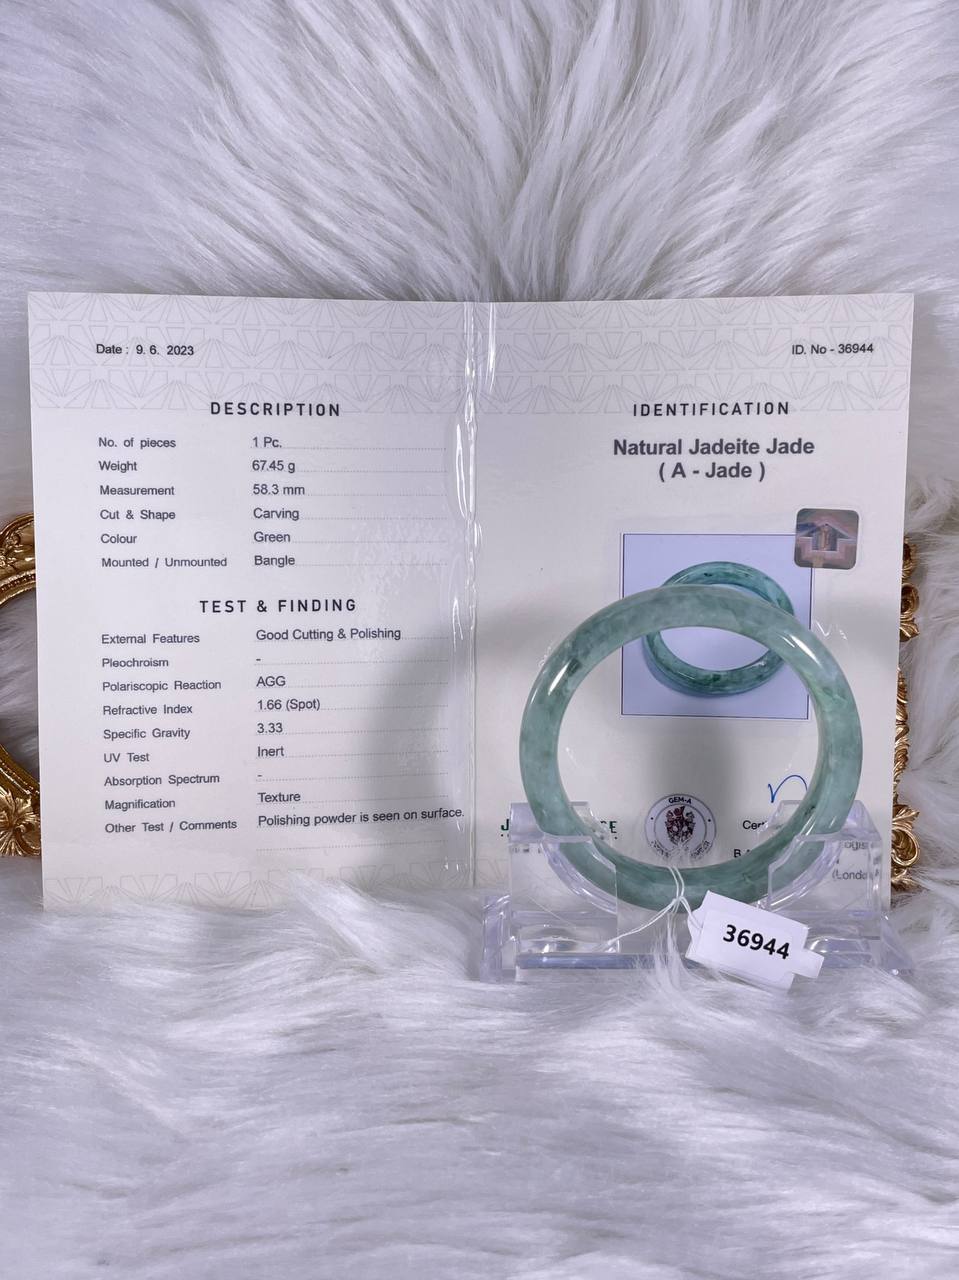 Grade A Natural Jade Bangle with certificate #36944